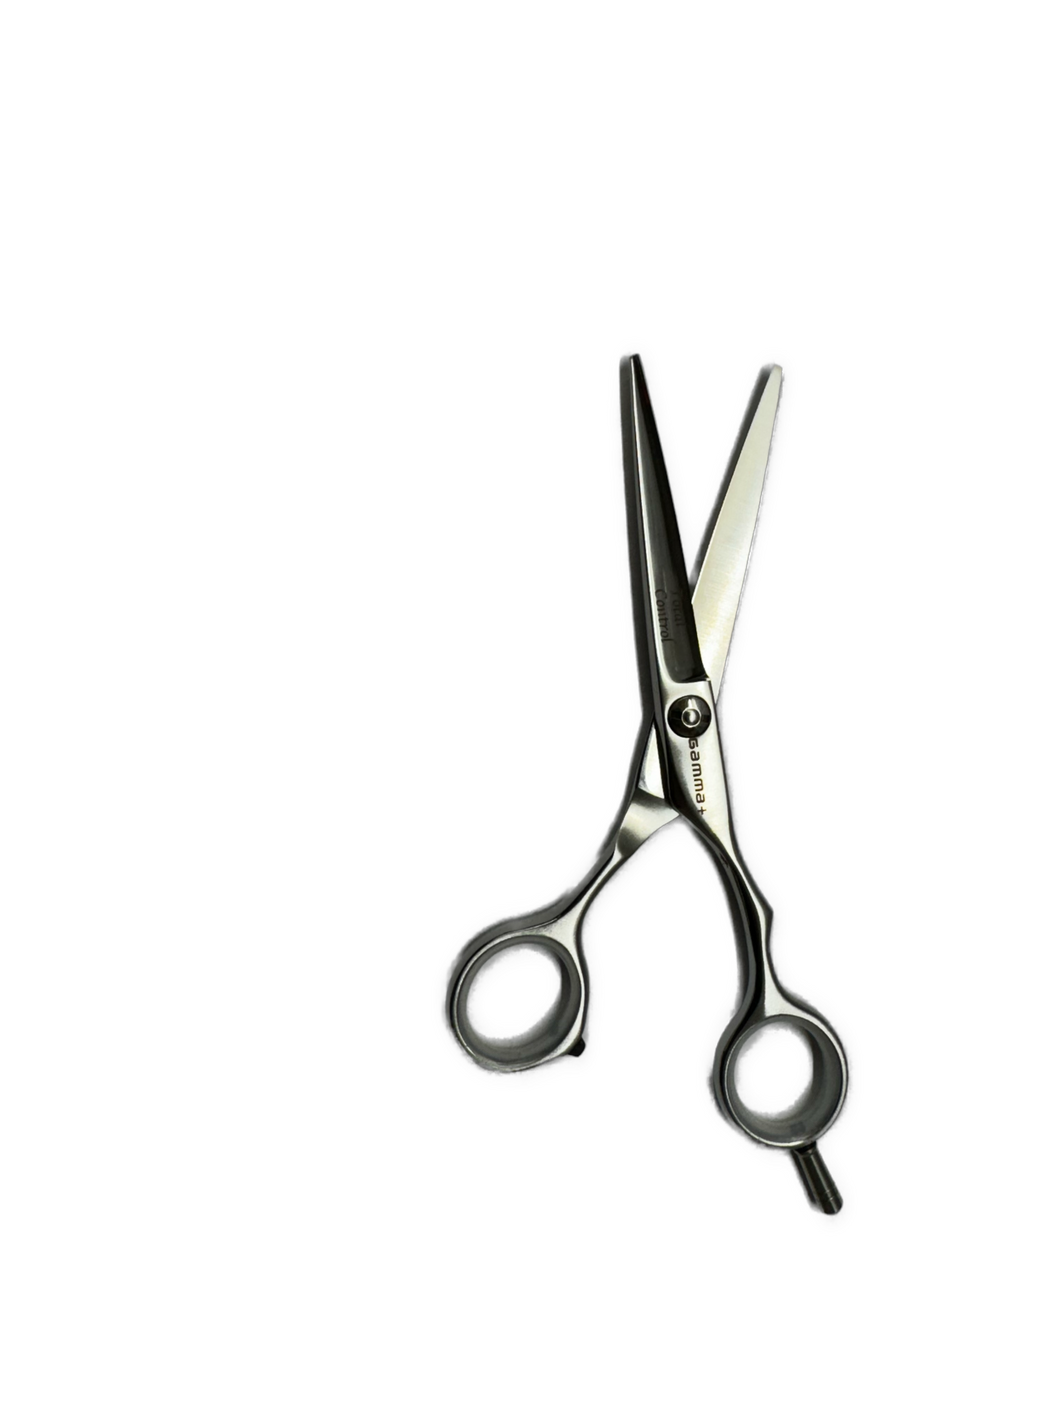 Gamma+ Total Control Scissors - available in 5.0